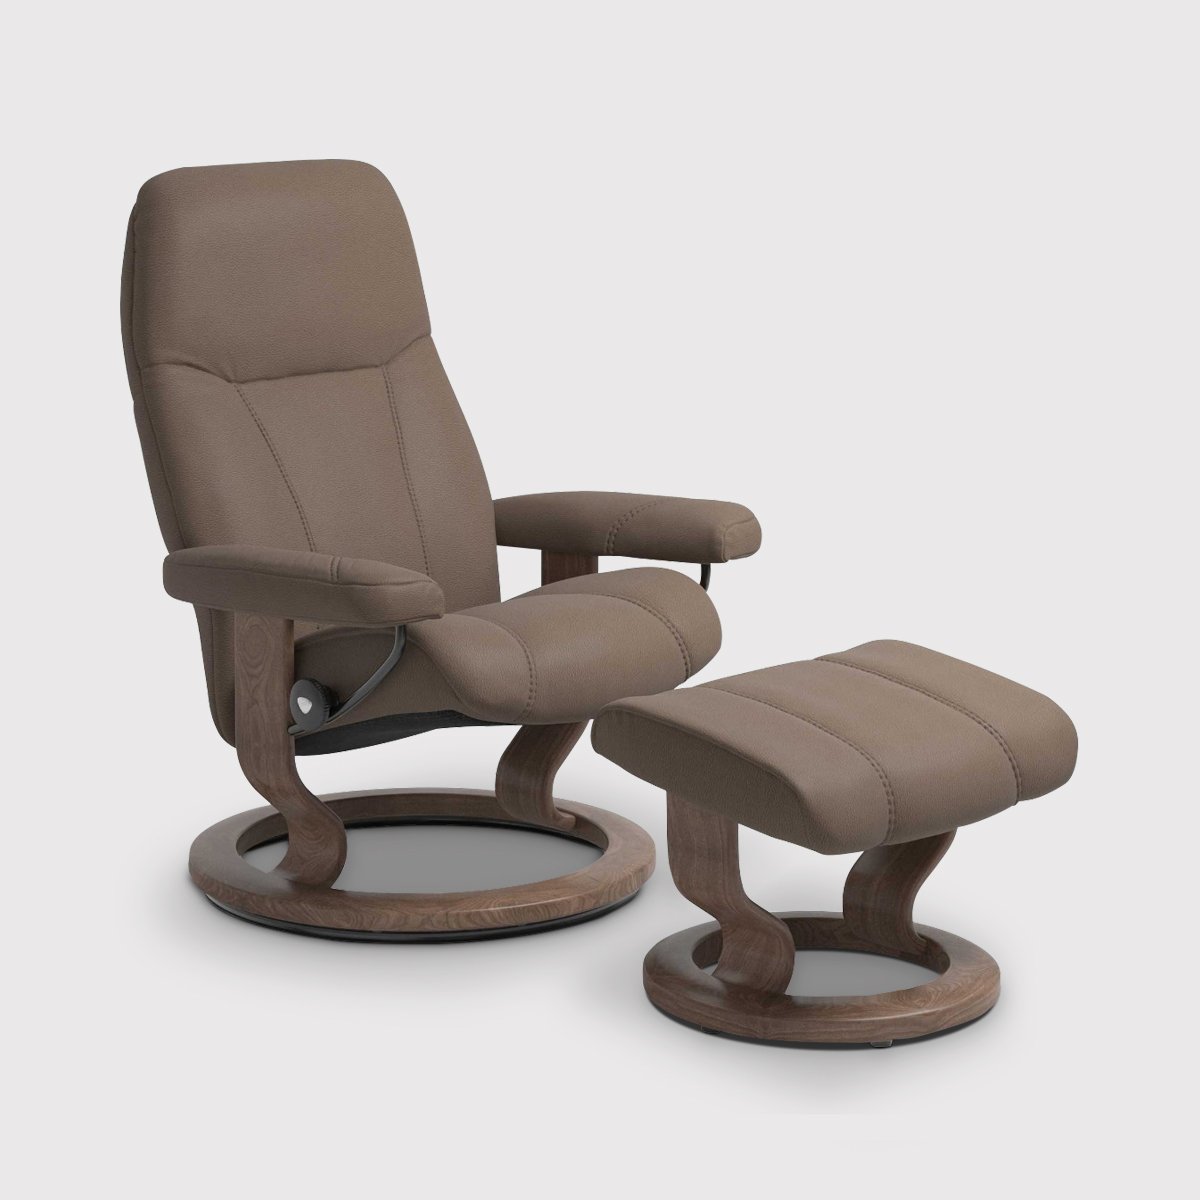 Stressless Consul Small Recliner Chair & Footstool Quickship, Brown Leather | Barker & Stonehouse